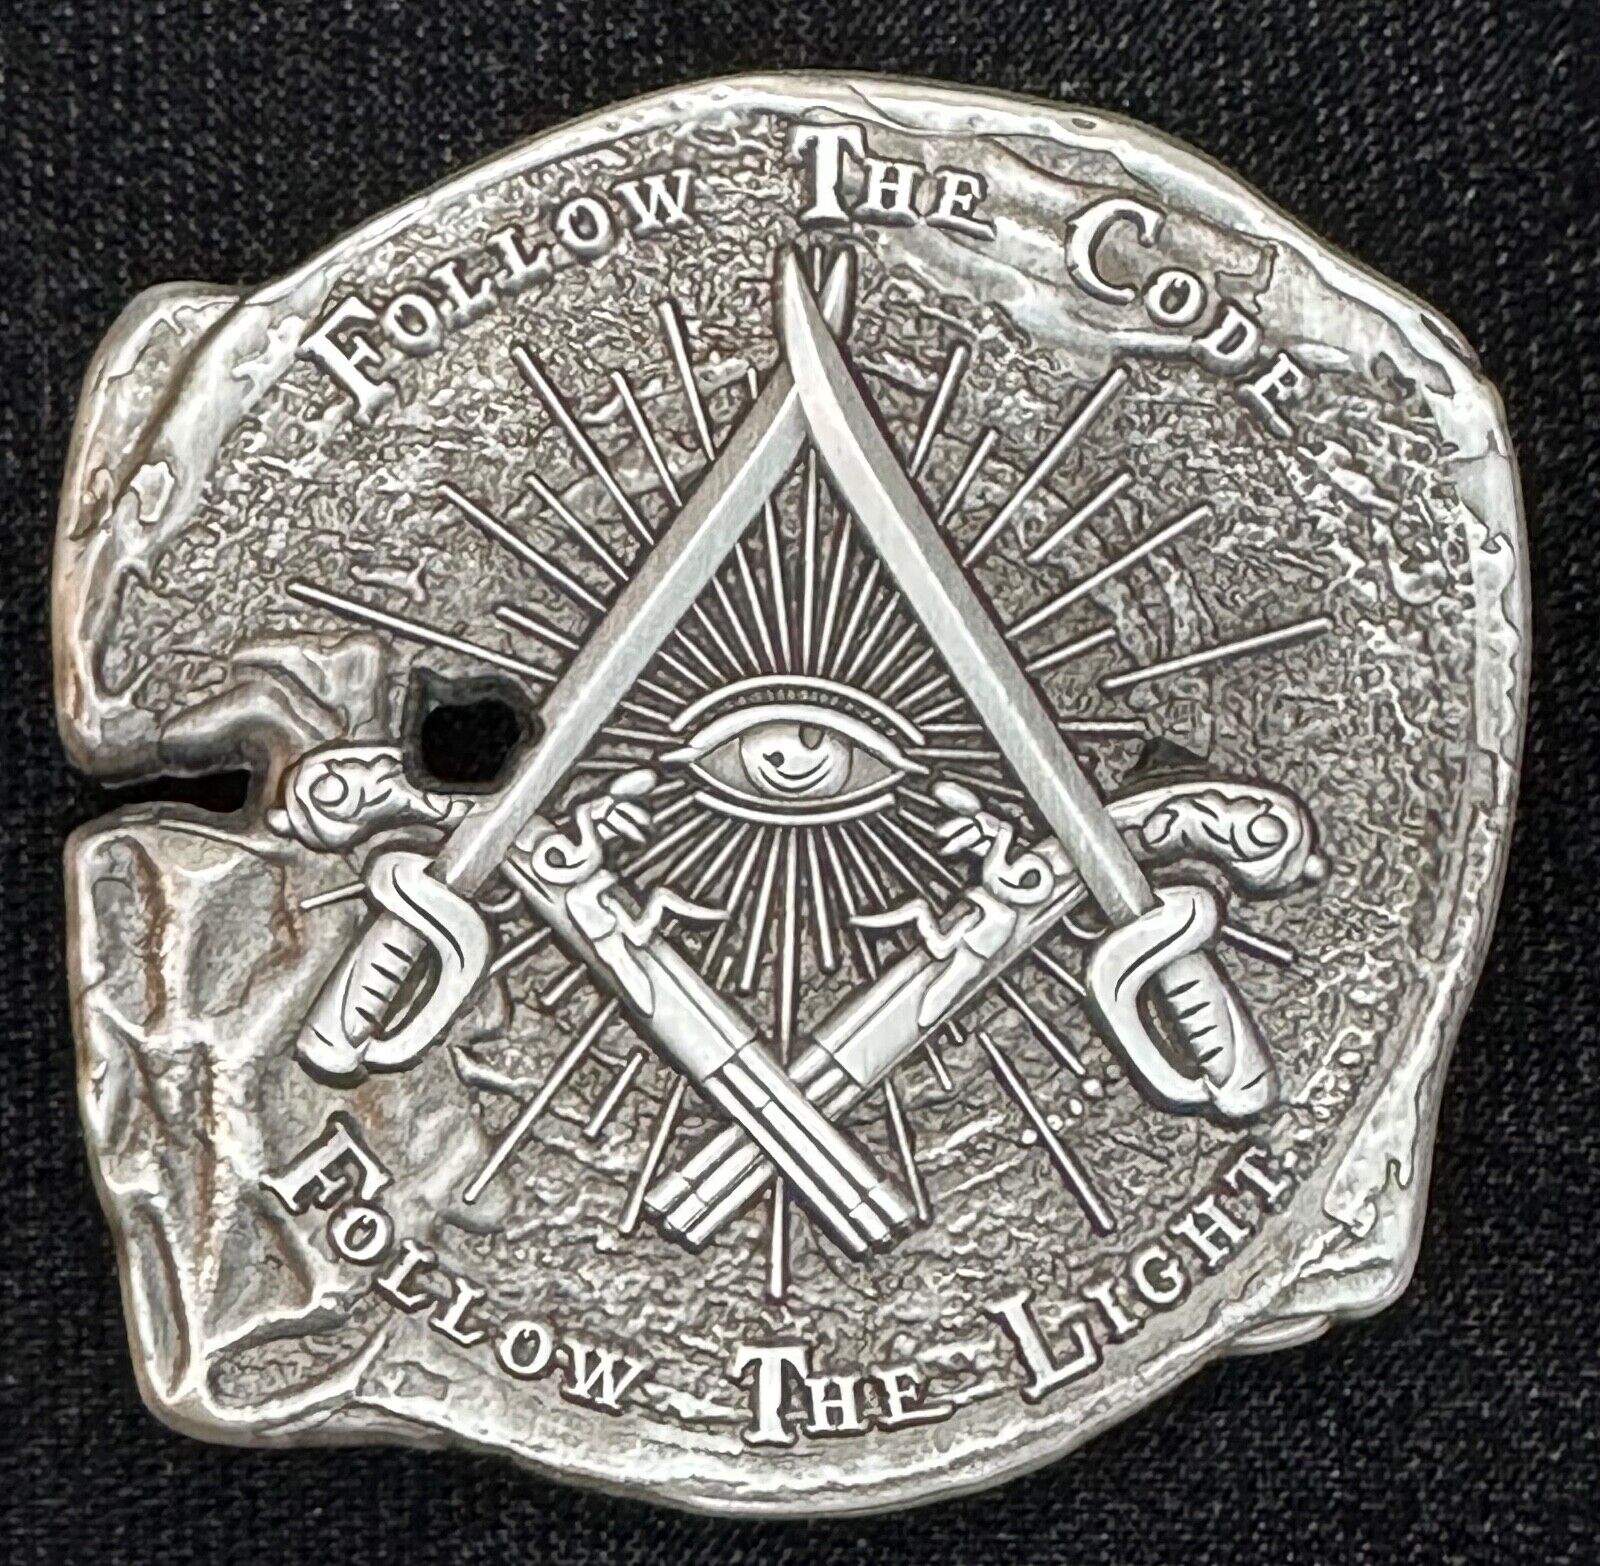 Doubloon Pirate Challenge coin with Freemason Masonic symbols, Antique silver